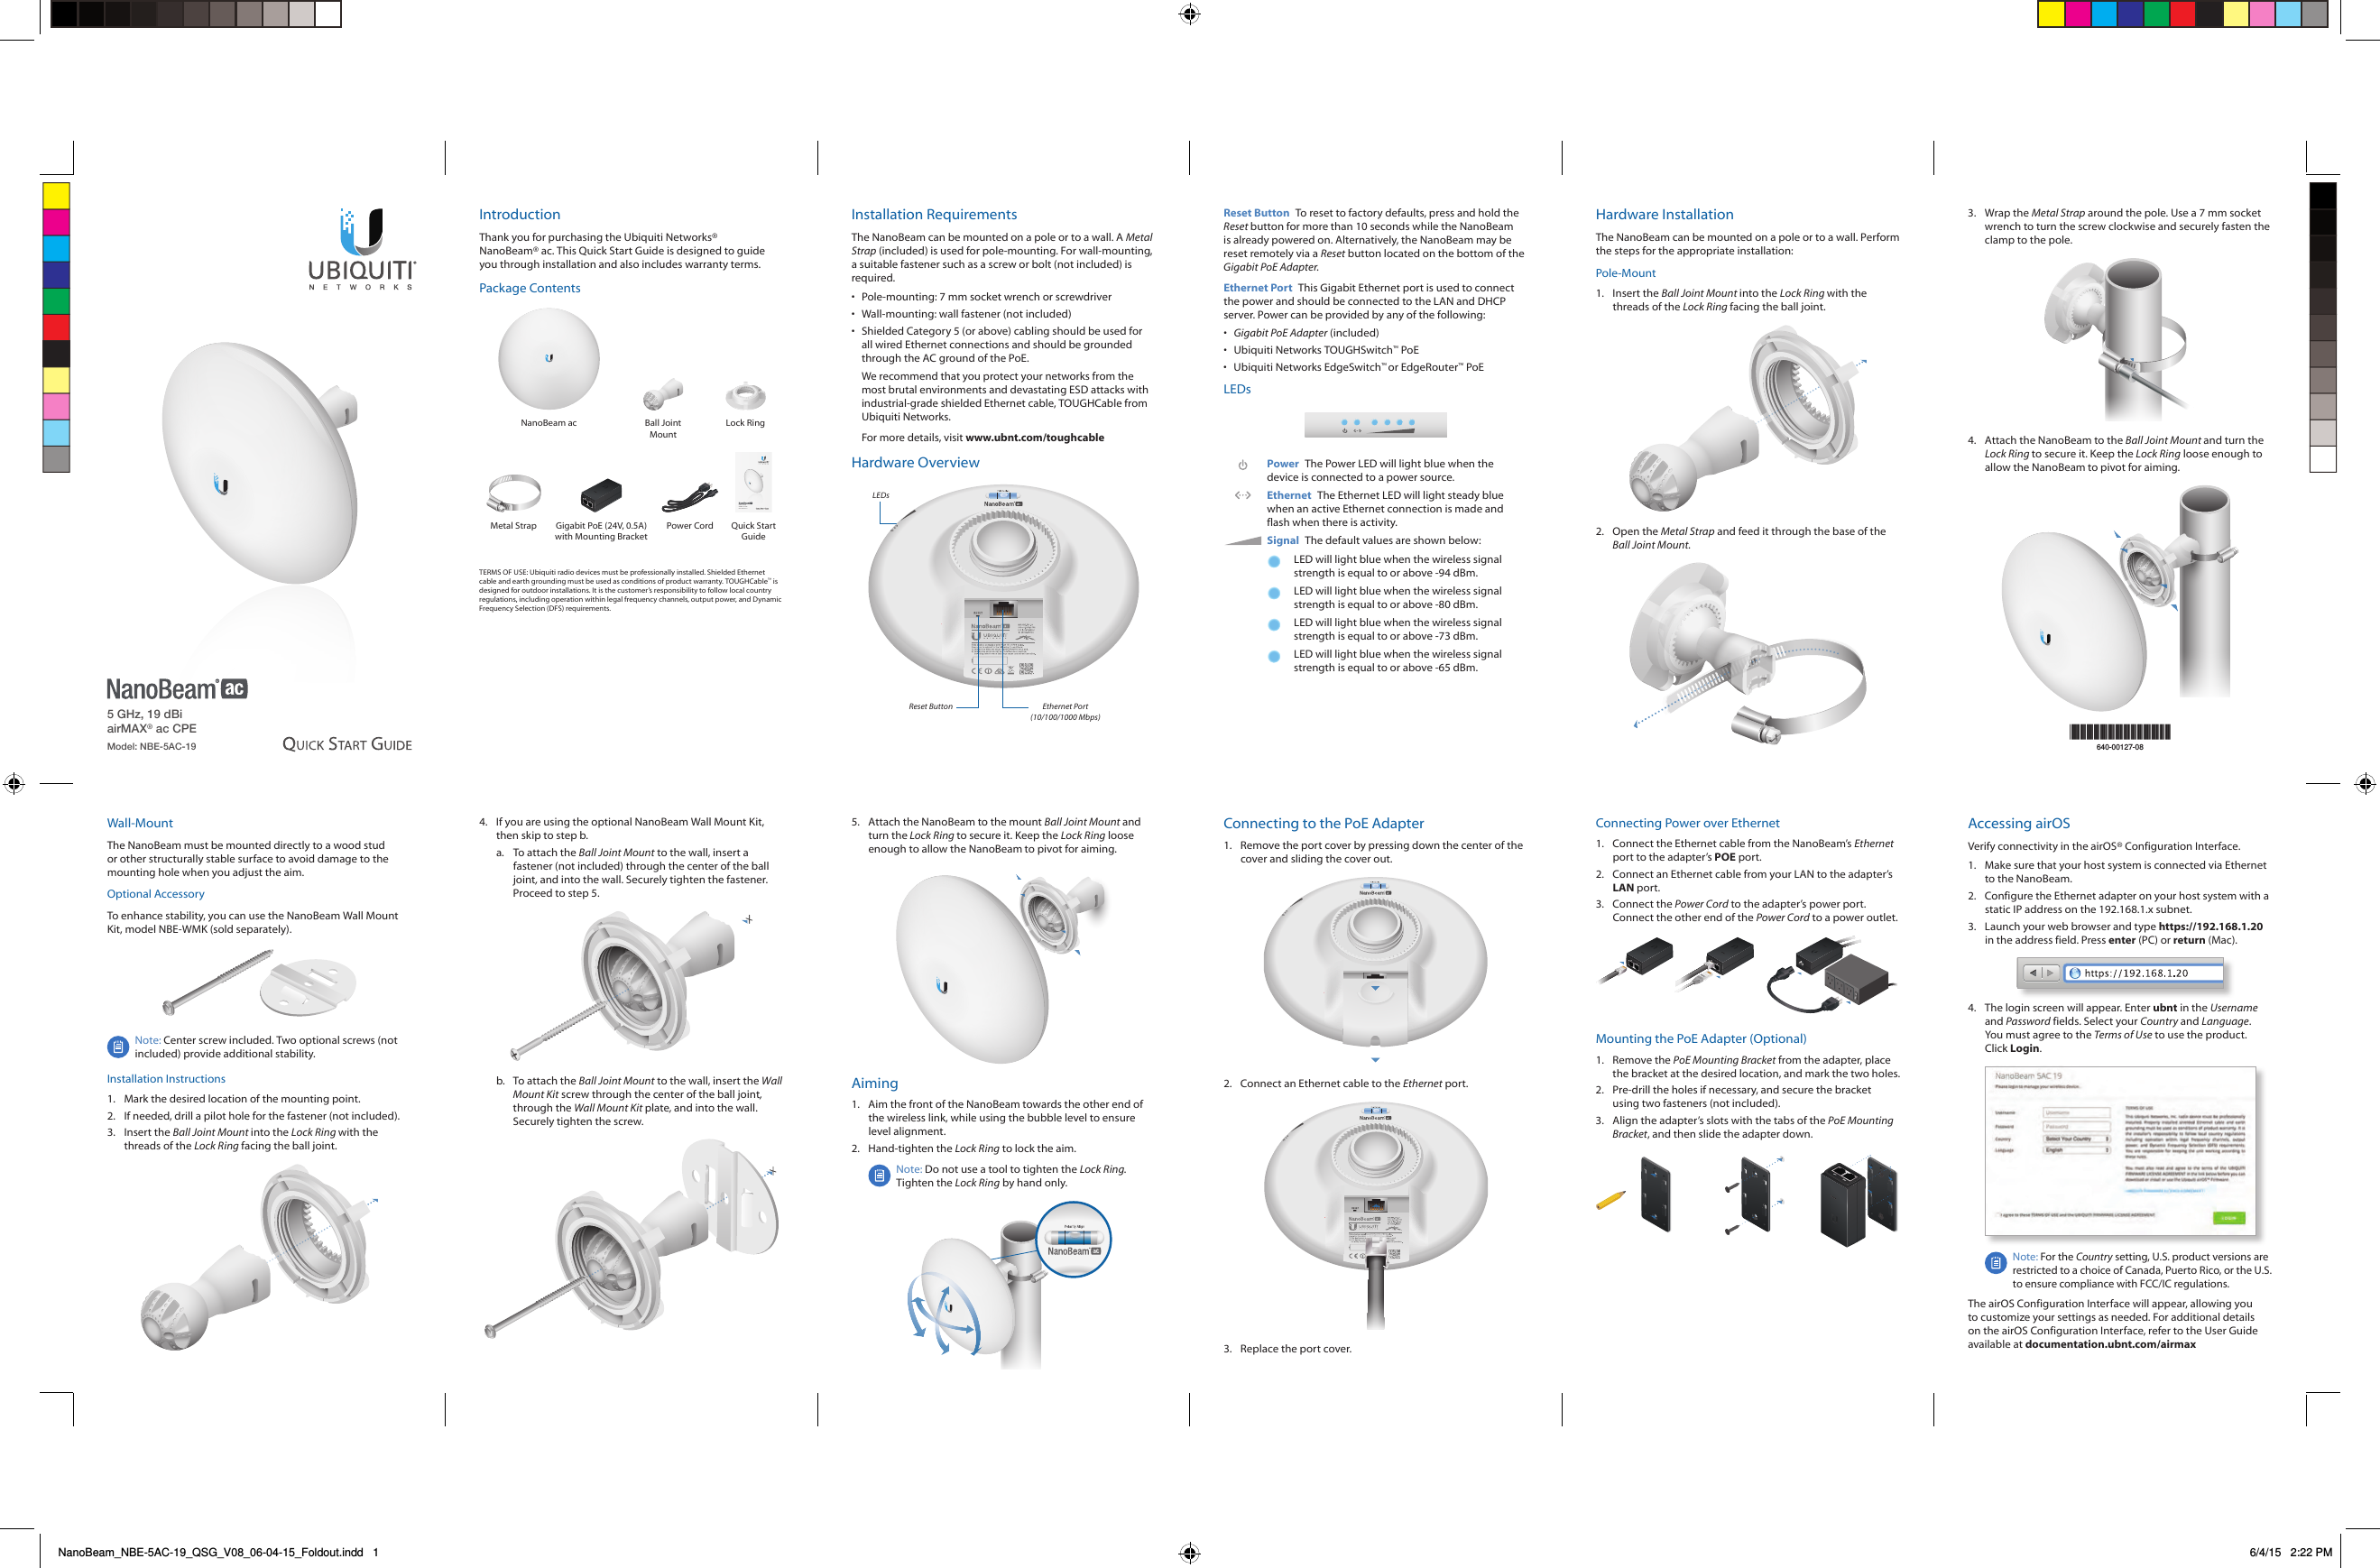 5 GHz, 19 dBi airMAX® ac CPEModel: NBE-5AC-19IntroductionThank you for purchasing the Ubiquiti Networks® NanoBeam®ac. This Quick Start Guide is designed to guide you through installation and also includes warranty terms.Package ContentsNanoBeam ac Ball Joint MountLock Ring5 GHz, 19 dBi airMAX® ac CPEModel: NBE-5AC-19Metal Strap Gigabit PoE (24V, 0.5A) with Mounting BracketPower Cord  Quick Start GuideTERMS OF USE: Ubiquiti radio devices must be professionally installed. Shielded Ethernet cable and earth grounding must be used as conditions of product warranty. TOUGHCable™ is designed for outdoor installations. It is the customer’s responsibility to follow local country regulations, including operation within legal frequency channels, output power, and Dynamic Frequency Selection (DFS) requirements.Installation RequirementsThe NanoBeam can be mounted on a pole or to a wall. A Metal Strap (included) is used for pole-mounting. For wall-mounting, a suitable fastener such as a screw or bolt (not included) is required.•  Pole-mounting: 7 mm socket wrench or screwdriver•  Wall-mounting: wall fastener (not included)•  Shielded Category 5 (or above) cabling should be used for all wired Ethernet connections and should be grounded through the AC ground of the PoE.We recommend that you protect your networks from the most brutal environments and devastating ESD attacks with industrial-grade shielded Ethernet cable, TOUGHCable from Ubiquiti Networks.For more details, visit www.ubnt.com/toughcableHardware OverviewLEDsReset Button Ethernet Port (10/100/1000 Mbps)Reset Button  To reset to factory defaults, press and hold the Reset button for more than 10 seconds while the NanoBeam is already poweredon. Alternatively, the NanoBeam may be reset remotely via a Reset button located on the bottom of the Gigabit PoE Adapter.Ethernet Port  This Gigabit Ethernet port is used to connect the power and should be connected to the LAN and DHCP server. Power can be provided by any of the following:•  Gigabit PoE Adapter (included)•  Ubiquiti Networks TOUGHSwitch™ PoE•  Ubiquiti Networks EdgeSwitch™ or EdgeRouter™ PoELEDsPower The Power LED will light blue when the device is connected to a power source.Ethernet  The Ethernet LED will light steady blue when an active Ethernet connection is made and flash when there is activity.Signal  The default values are shown below:LED will light blue when the wireless signal strength is equal to or above -94 dBm.LED will light blue when the wireless signal strength is equal to or above -80 dBm.LED will light blue when the wireless signal strength is equal to or above -73 dBm.LED will light blue when the wireless signal strength is equal to or above -65 dBm.Hardware InstallationThe NanoBeam can be mounted on a pole or to a wall. Perform the steps for the appropriate installation:Pole-Mount1.  Insert the Ball Joint Mount into the Lock Ring with the threads of the Lock Ring facing the ball joint.2.  Open the Metal Strap and feed it through the base of the Ball Joint Mount.*640-00127-08*640-00127-083.  Wrap the Metal Strap around the pole. Use a 7 mm socket wrench to turn the screw clockwise and securely fasten the clamp to the pole.4.  Attach the NanoBeam to the Ball Joint Mount and turn the Lock Ring to secure it. Keep the Lock Ring loose enough to allow the NanoBeam to pivot for aiming.Wall-MountThe NanoBeam must be mounted directly to a wood stud or other structurally stable surface to avoid damage to the mounting hole when you adjust the aim.Optional AccessoryTo enhance stability, you can use the NanoBeam Wall Mount Kit, model NBE-WMK (soldseparately).Note: Center screw included. Two optional screws (not included) provide additional stability. Installation Instructions1.  Mark the desired location of the mounting point.2.  If needed, drill a pilot hole for the fastener (not included).3.  Insert the Ball Joint Mount into the Lock Ring with the threads of the Lock Ring facing the ball joint.4.  If you are using the optional NanoBeam Wall Mount Kit, then skip to step b.a.  To attach the Ball Joint Mount to the wall, insert a fastener (not included) through the center of the ball joint, and into the wall. Securely tighten the fastener. Proceed to step 5.b.  To attach the Ball Joint Mount to the wall, insert the Wall Mount Kit screw through the center of the ball joint, through the Wall Mount Kit plate, and into the wall. Securely tighten the screw.5.  Attach the NanoBeam to the mount Ball Joint Mount and turn the Lock Ring to secure it. Keep the Lock Ring loose enough to allow the NanoBeam to pivot for aiming.Aiming1.  Aim the front of the NanoBeam towards the other end of the wireless link, while using the bubble level to ensure level alignment.2.  Hand-tighten the Lock Ring to lock the aim.Note: Do not use a tool to tighten the Lock Ring. Tighten the Lock Ring by hand only.Connecting to the PoE Adapter1.  Remove the port cover by pressing down the center of the cover and sliding the cover out.2.  Connect an Ethernet cable to the Ethernet port.3.  Replace the port cover.Connecting Power over Ethernet1.  Connect the Ethernet cable from the NanoBeam’s Ethernet port to the adapter’s POE port.2.  Connect an Ethernet cable from your LAN to the adapter’s LAN port. 3.  Connect the Power Cord to the adapter’s power port. Connect the other end of the Power Cord to a power outlet.Mounting the PoE Adapter (Optional)1.  Remove the PoE Mounting Bracket from the adapter, place the bracket at the desired location, and mark the two holes. 2.  Pre-drill the holes if necessary, and secure the bracket using two fasteners (not included).3.  Align the adapter’s slots with the tabs of the PoE Mounting Bracket, and then slide the adapterdown.Accessing airOSVerify connectivity in the airOS® Configuration Interface. 1.  Make sure that your host system is connected via Ethernet to the NanoBeam. 2.  Configure the Ethernet adapter on your host system with a static IP address on the 192.168.1.x subnet.3.  Launch your web browser and type https://192.168.1.20 in the address field. Press enter (PC) or return (Mac). 4.  The login screen will appear. Enter ubnt in the Username and Password fields. Select your Country and Language. You must agree to the Terms of Use to use the product. Click Login.Note: For the Country setting, U.S. product versions are restricted to a choice of Canada, Puerto Rico, or the U.S. to ensure compliance with FCC/IC regulations. The airOS Configuration Interface will appear, allowing you to customize your settings as needed. For additional details on the airOS Configuration Interface, refer to the User Guide available at documentation.ubnt.com/airmaxNanoBeam_NBE-5AC-19_QSG_V08_06-04-15_Foldout.indd   1 6/4/15   2:22 PM